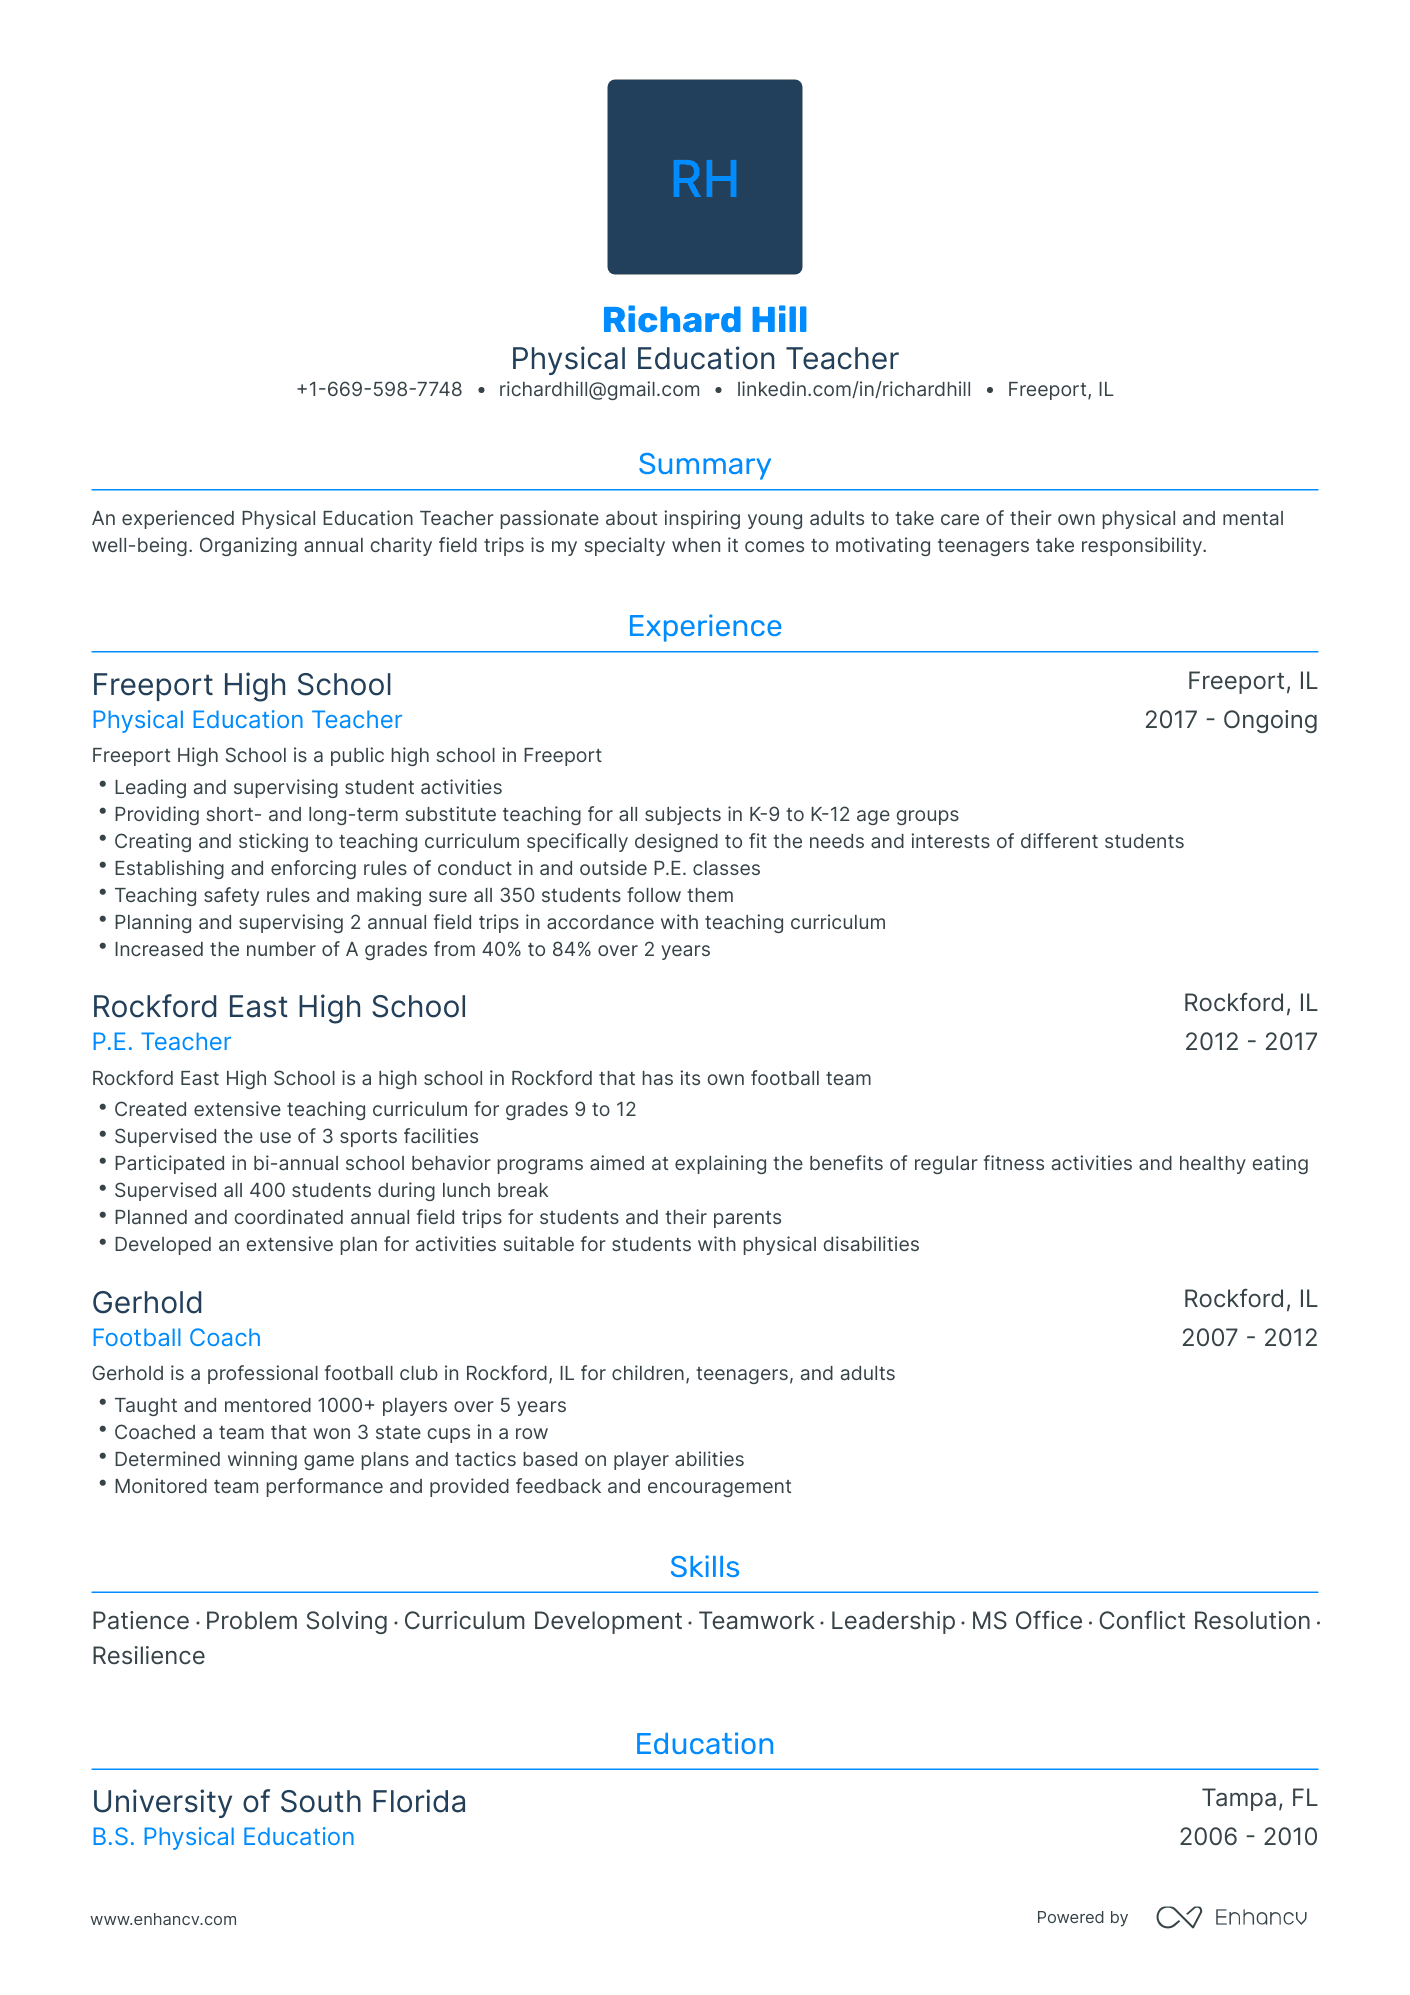 Traditional Physical Education Teacher Resume Template